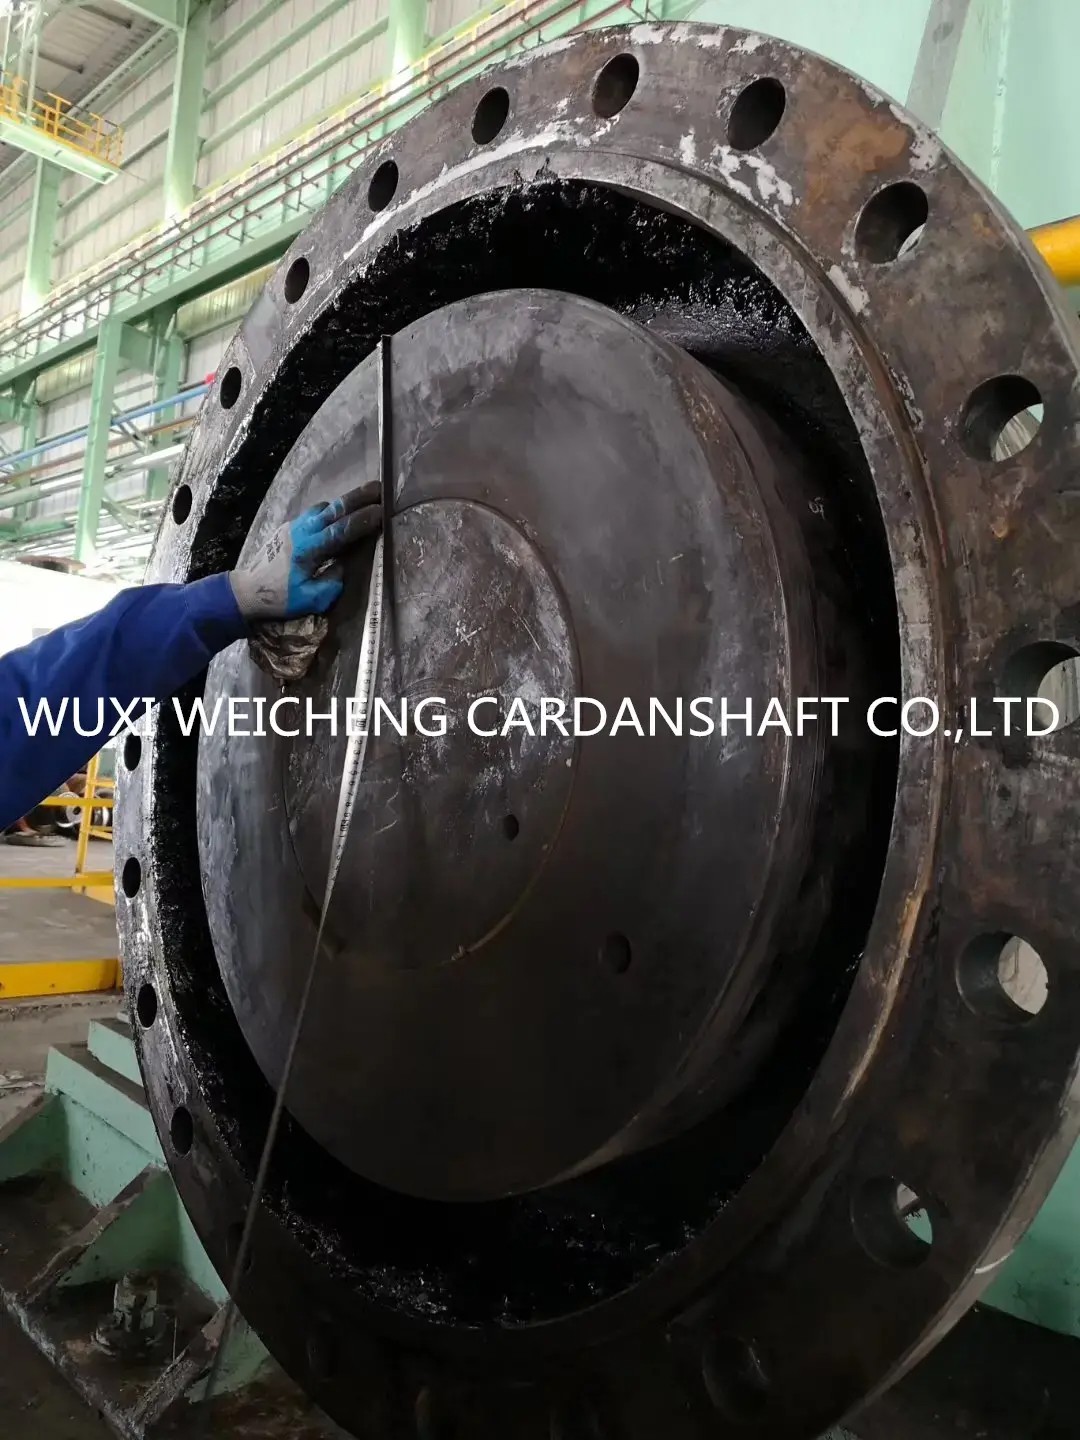 WEICHENG CARDANSHAFT engineers provide technical support t (1).png